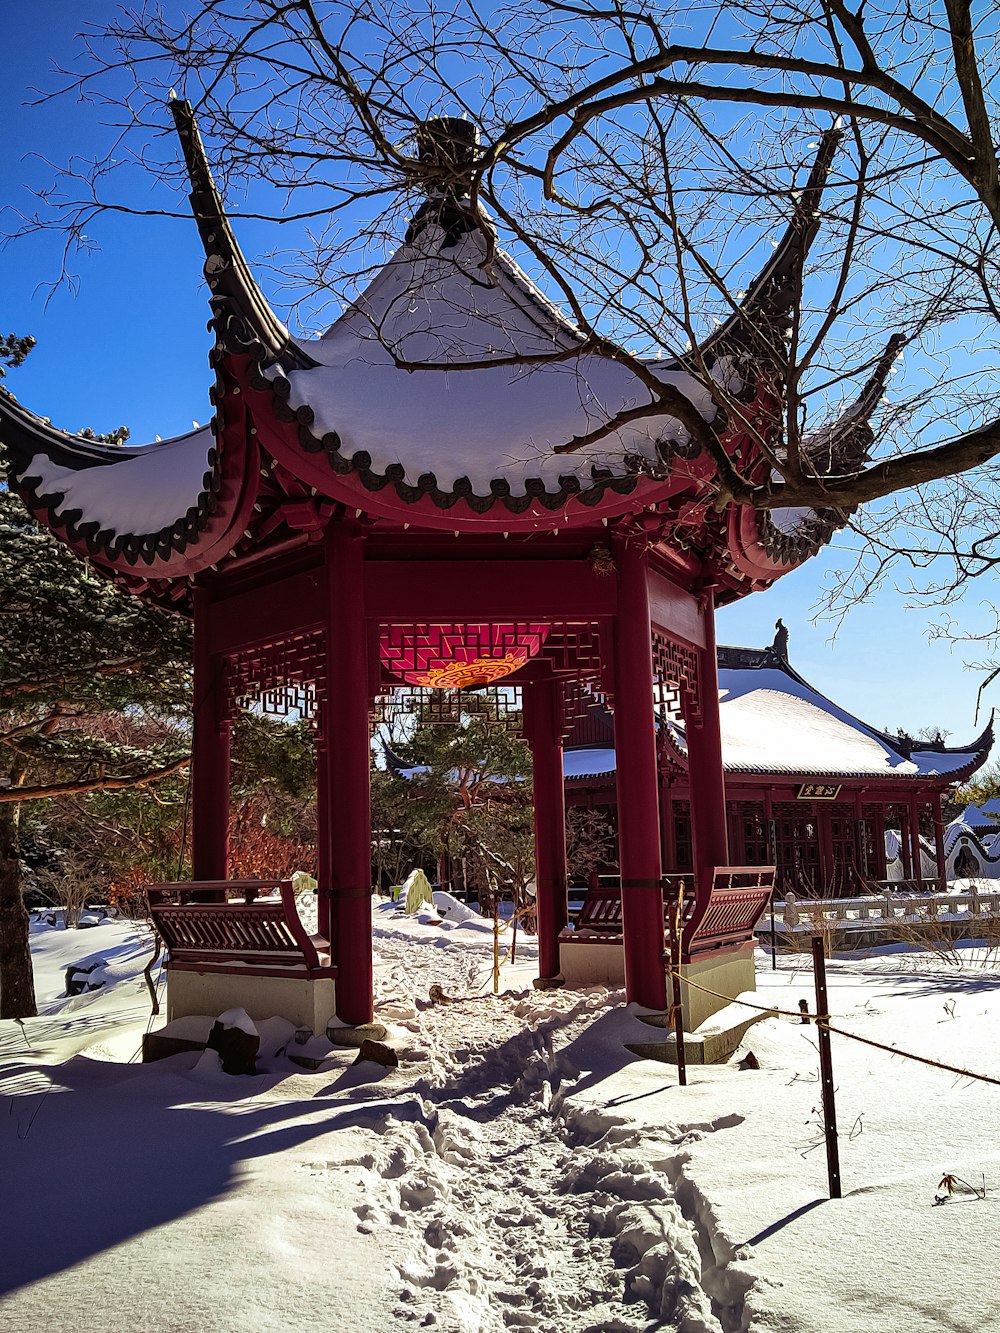 a red gazebo in the middle of a snowy park